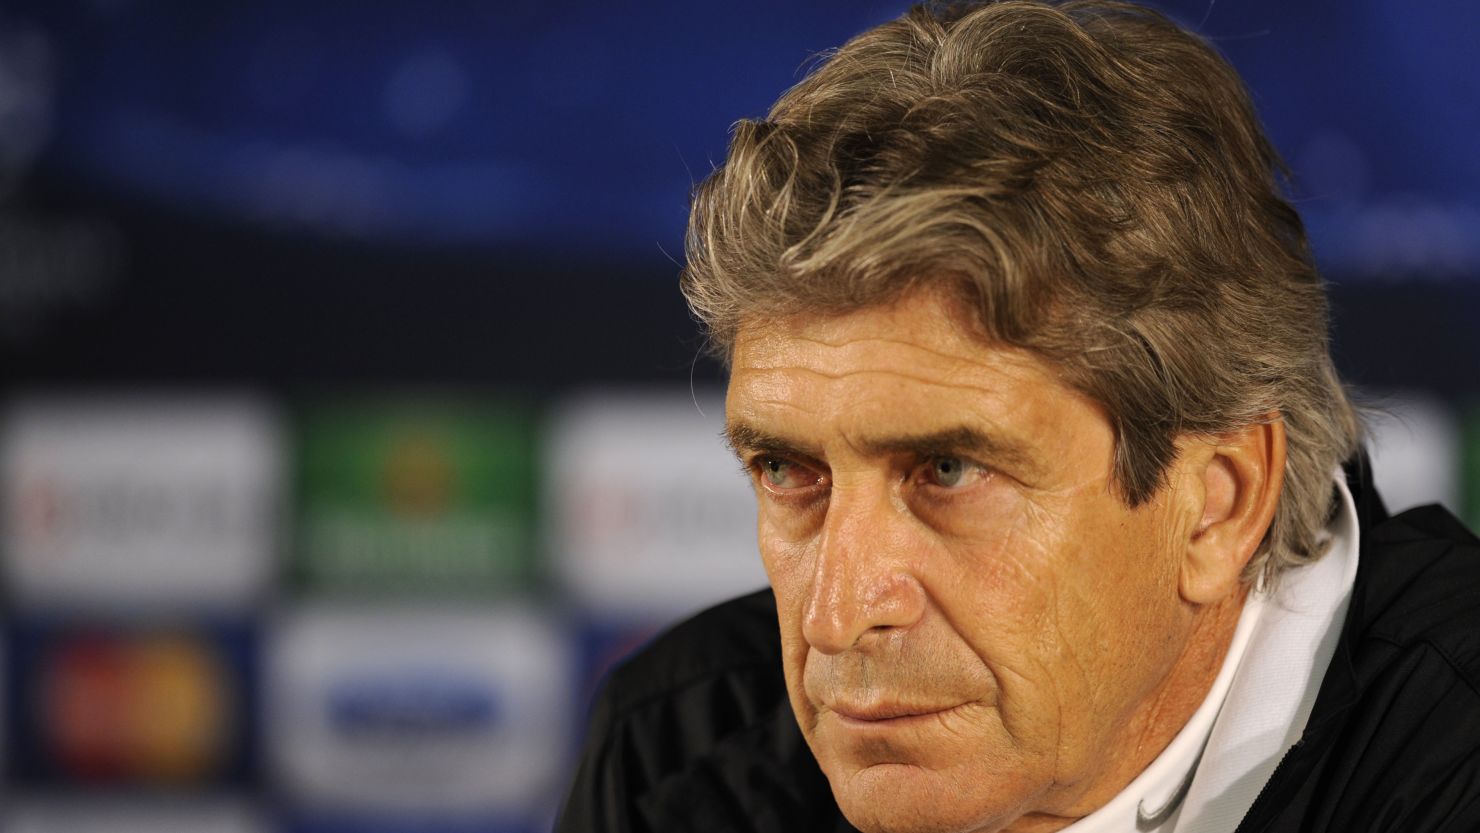 Manuel Pellegrini joins Manchester City after previously managing clubs including Real Madrid and Villarreal. 